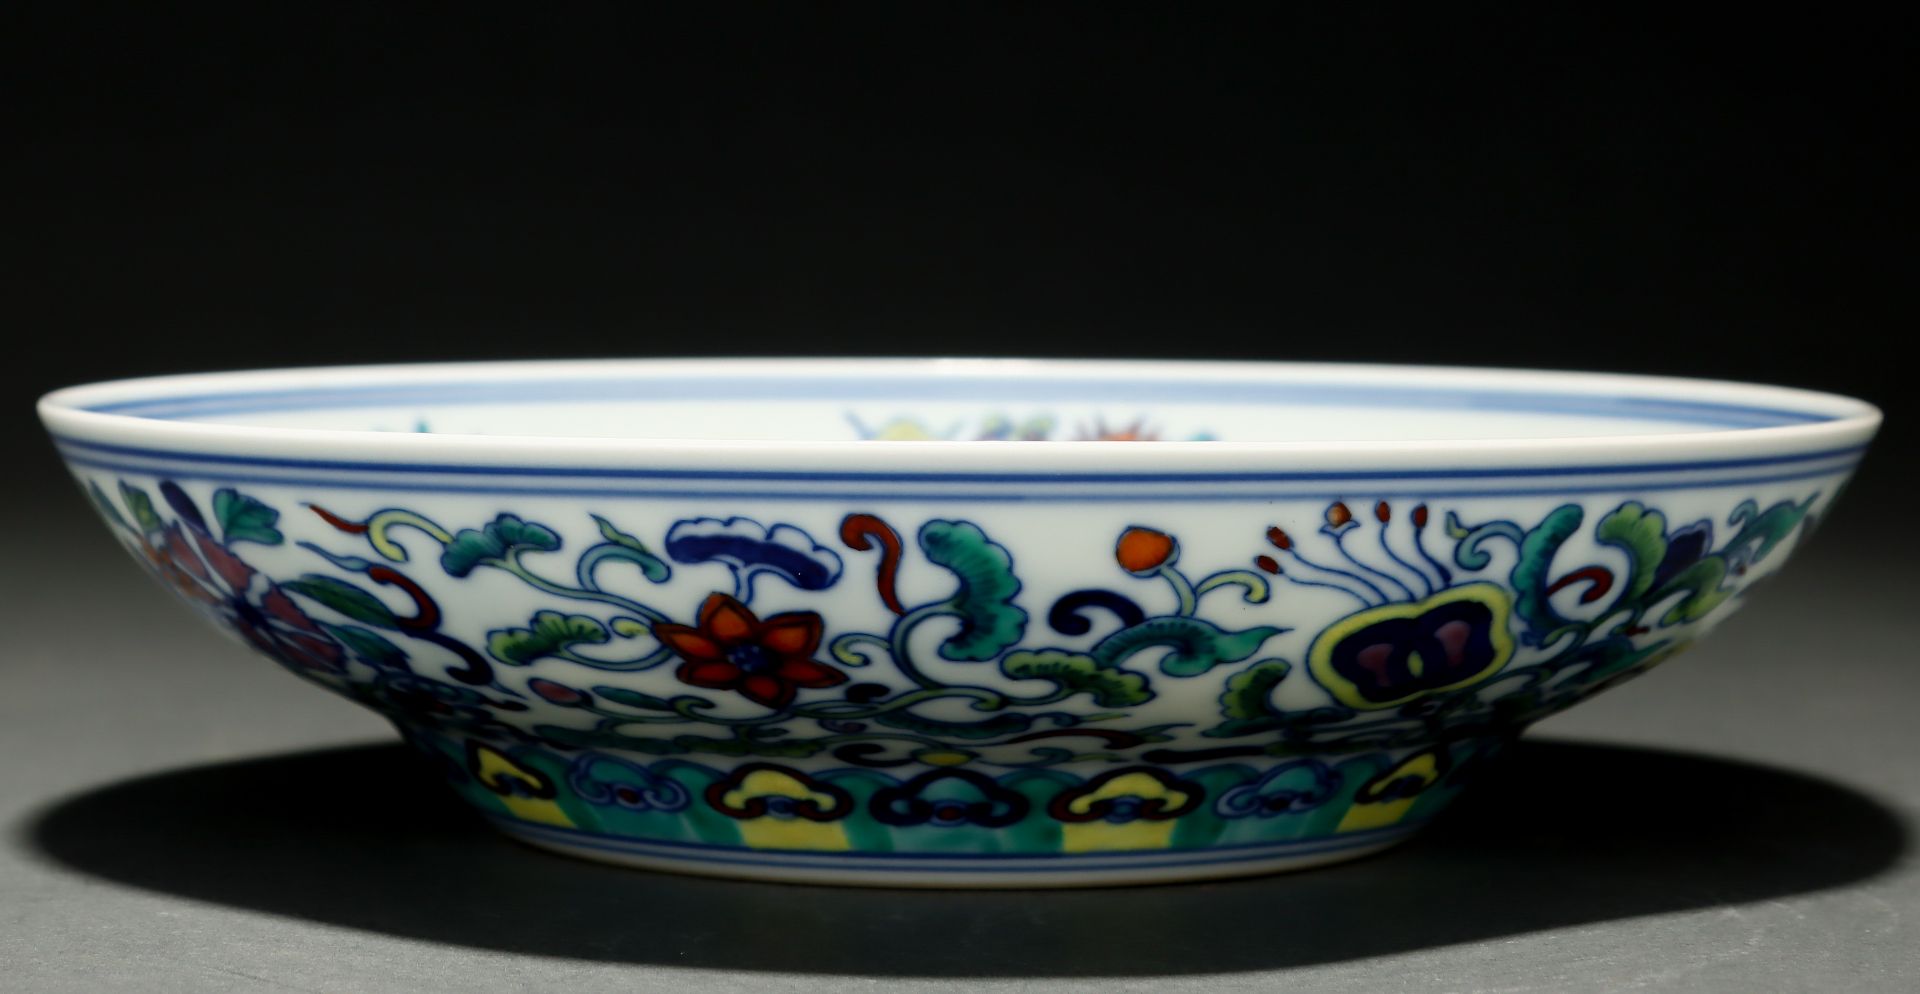 A Chinese Doucai Glaze Eight Treasures Bowl - Image 9 of 9